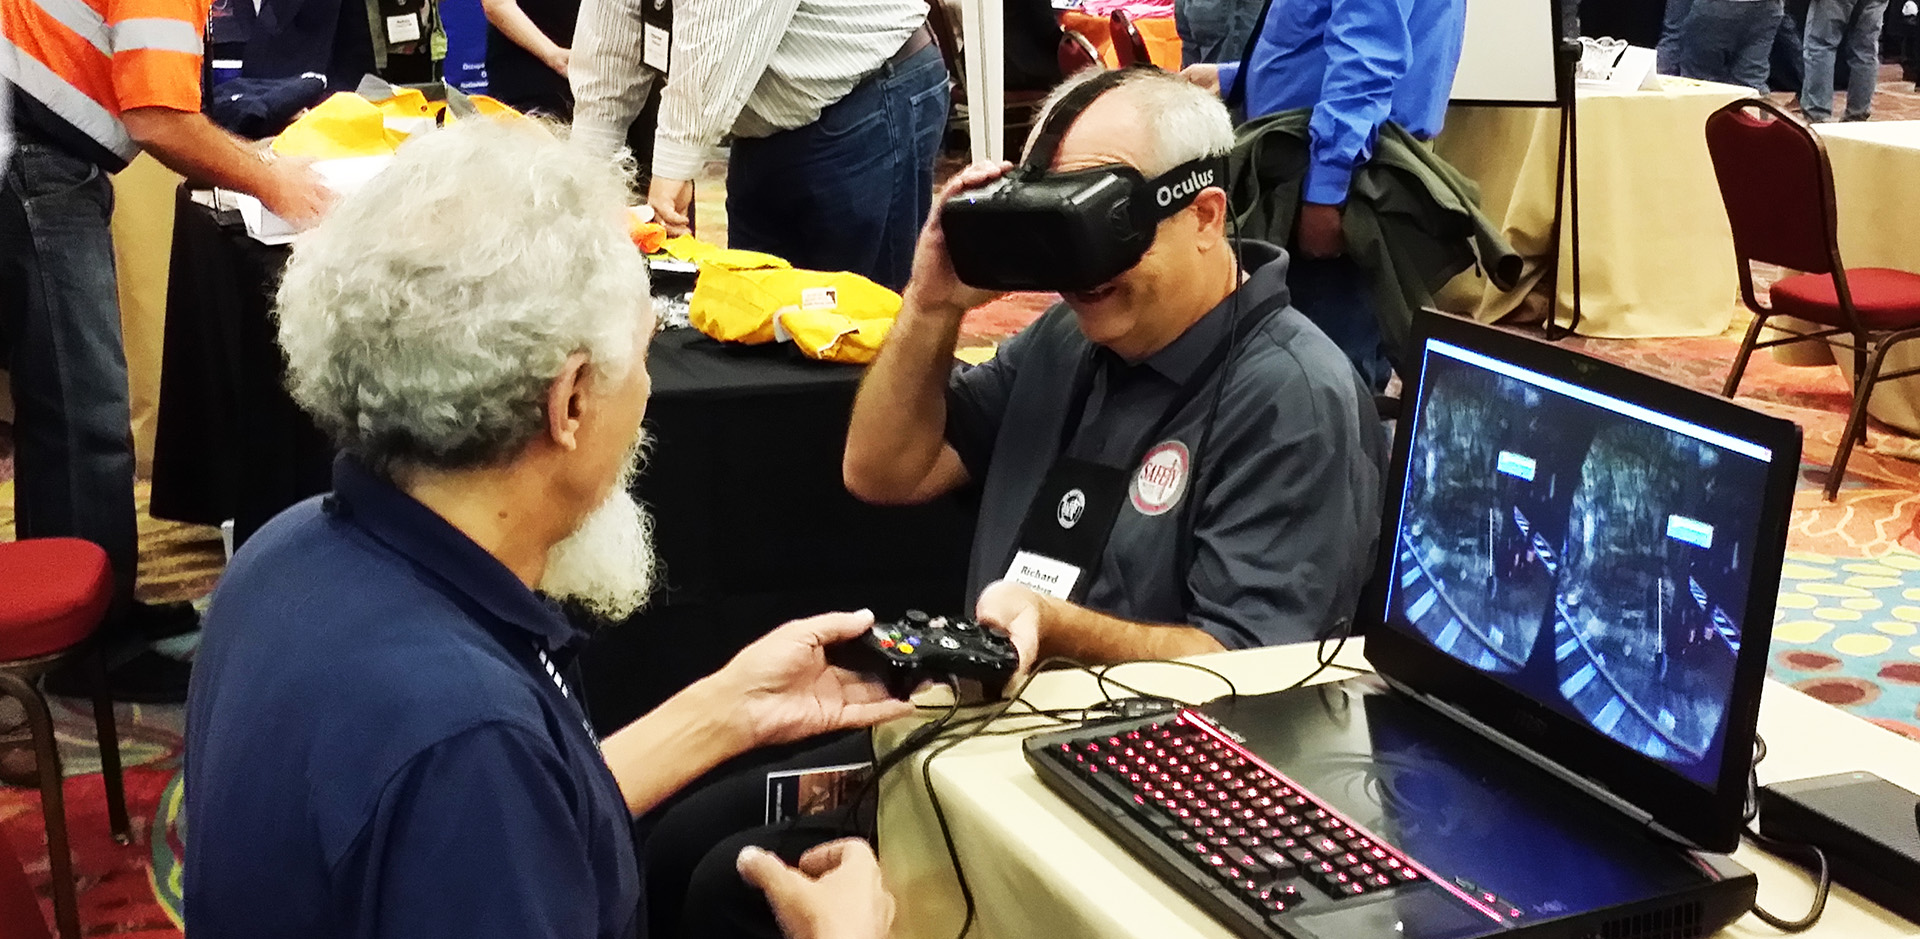 A user explores a serious game using a virtual reality head mounted display